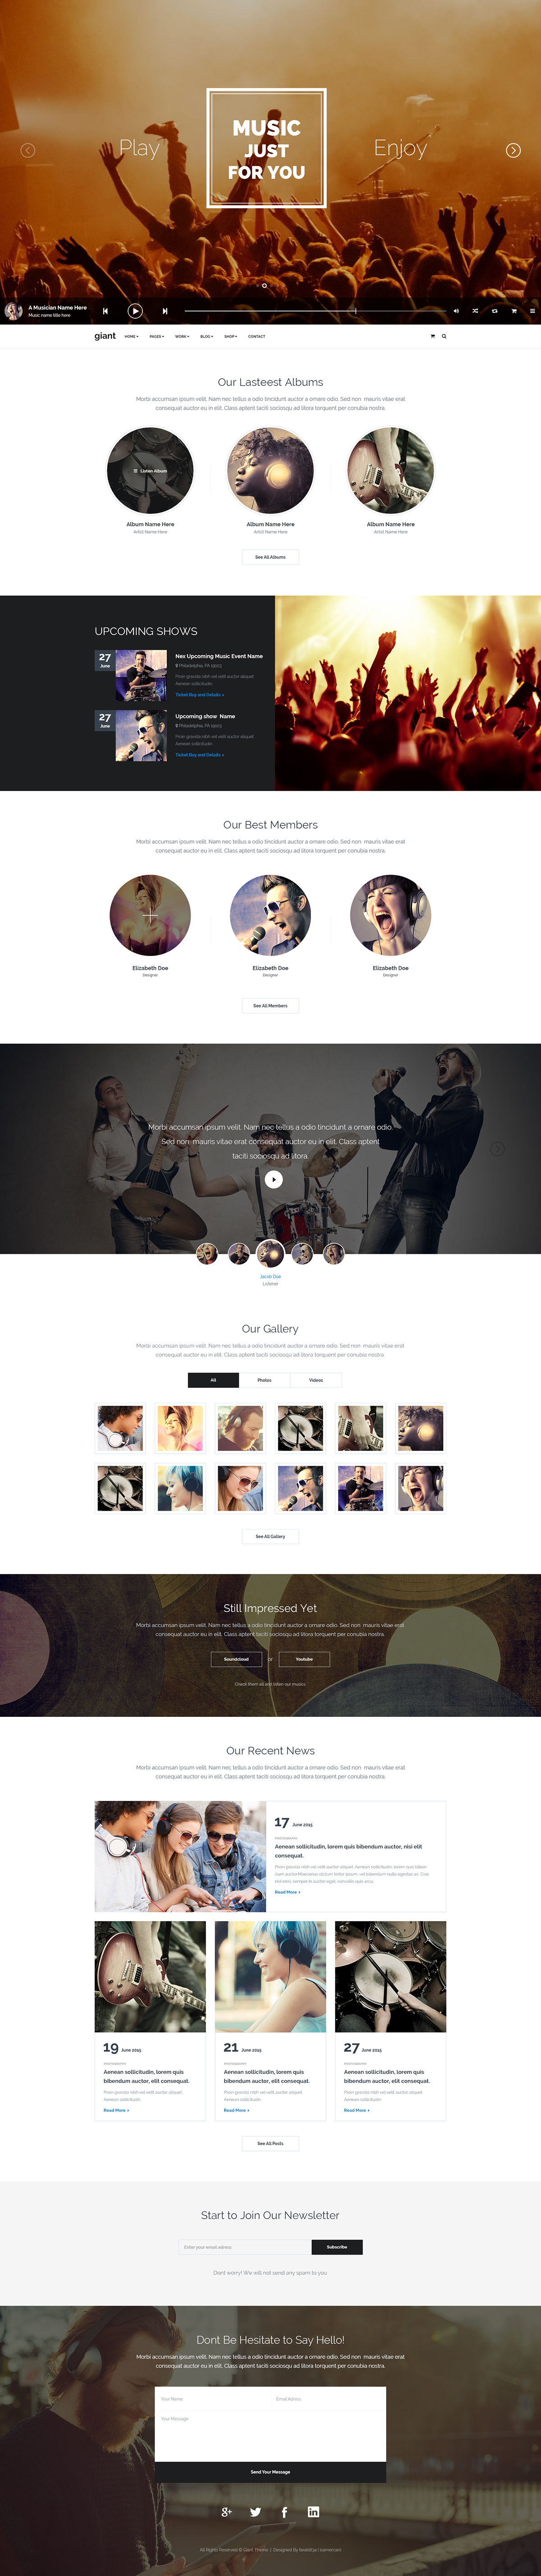 Theme multi giant isamercan app musician agency landing creative page builder diving school lister Blog